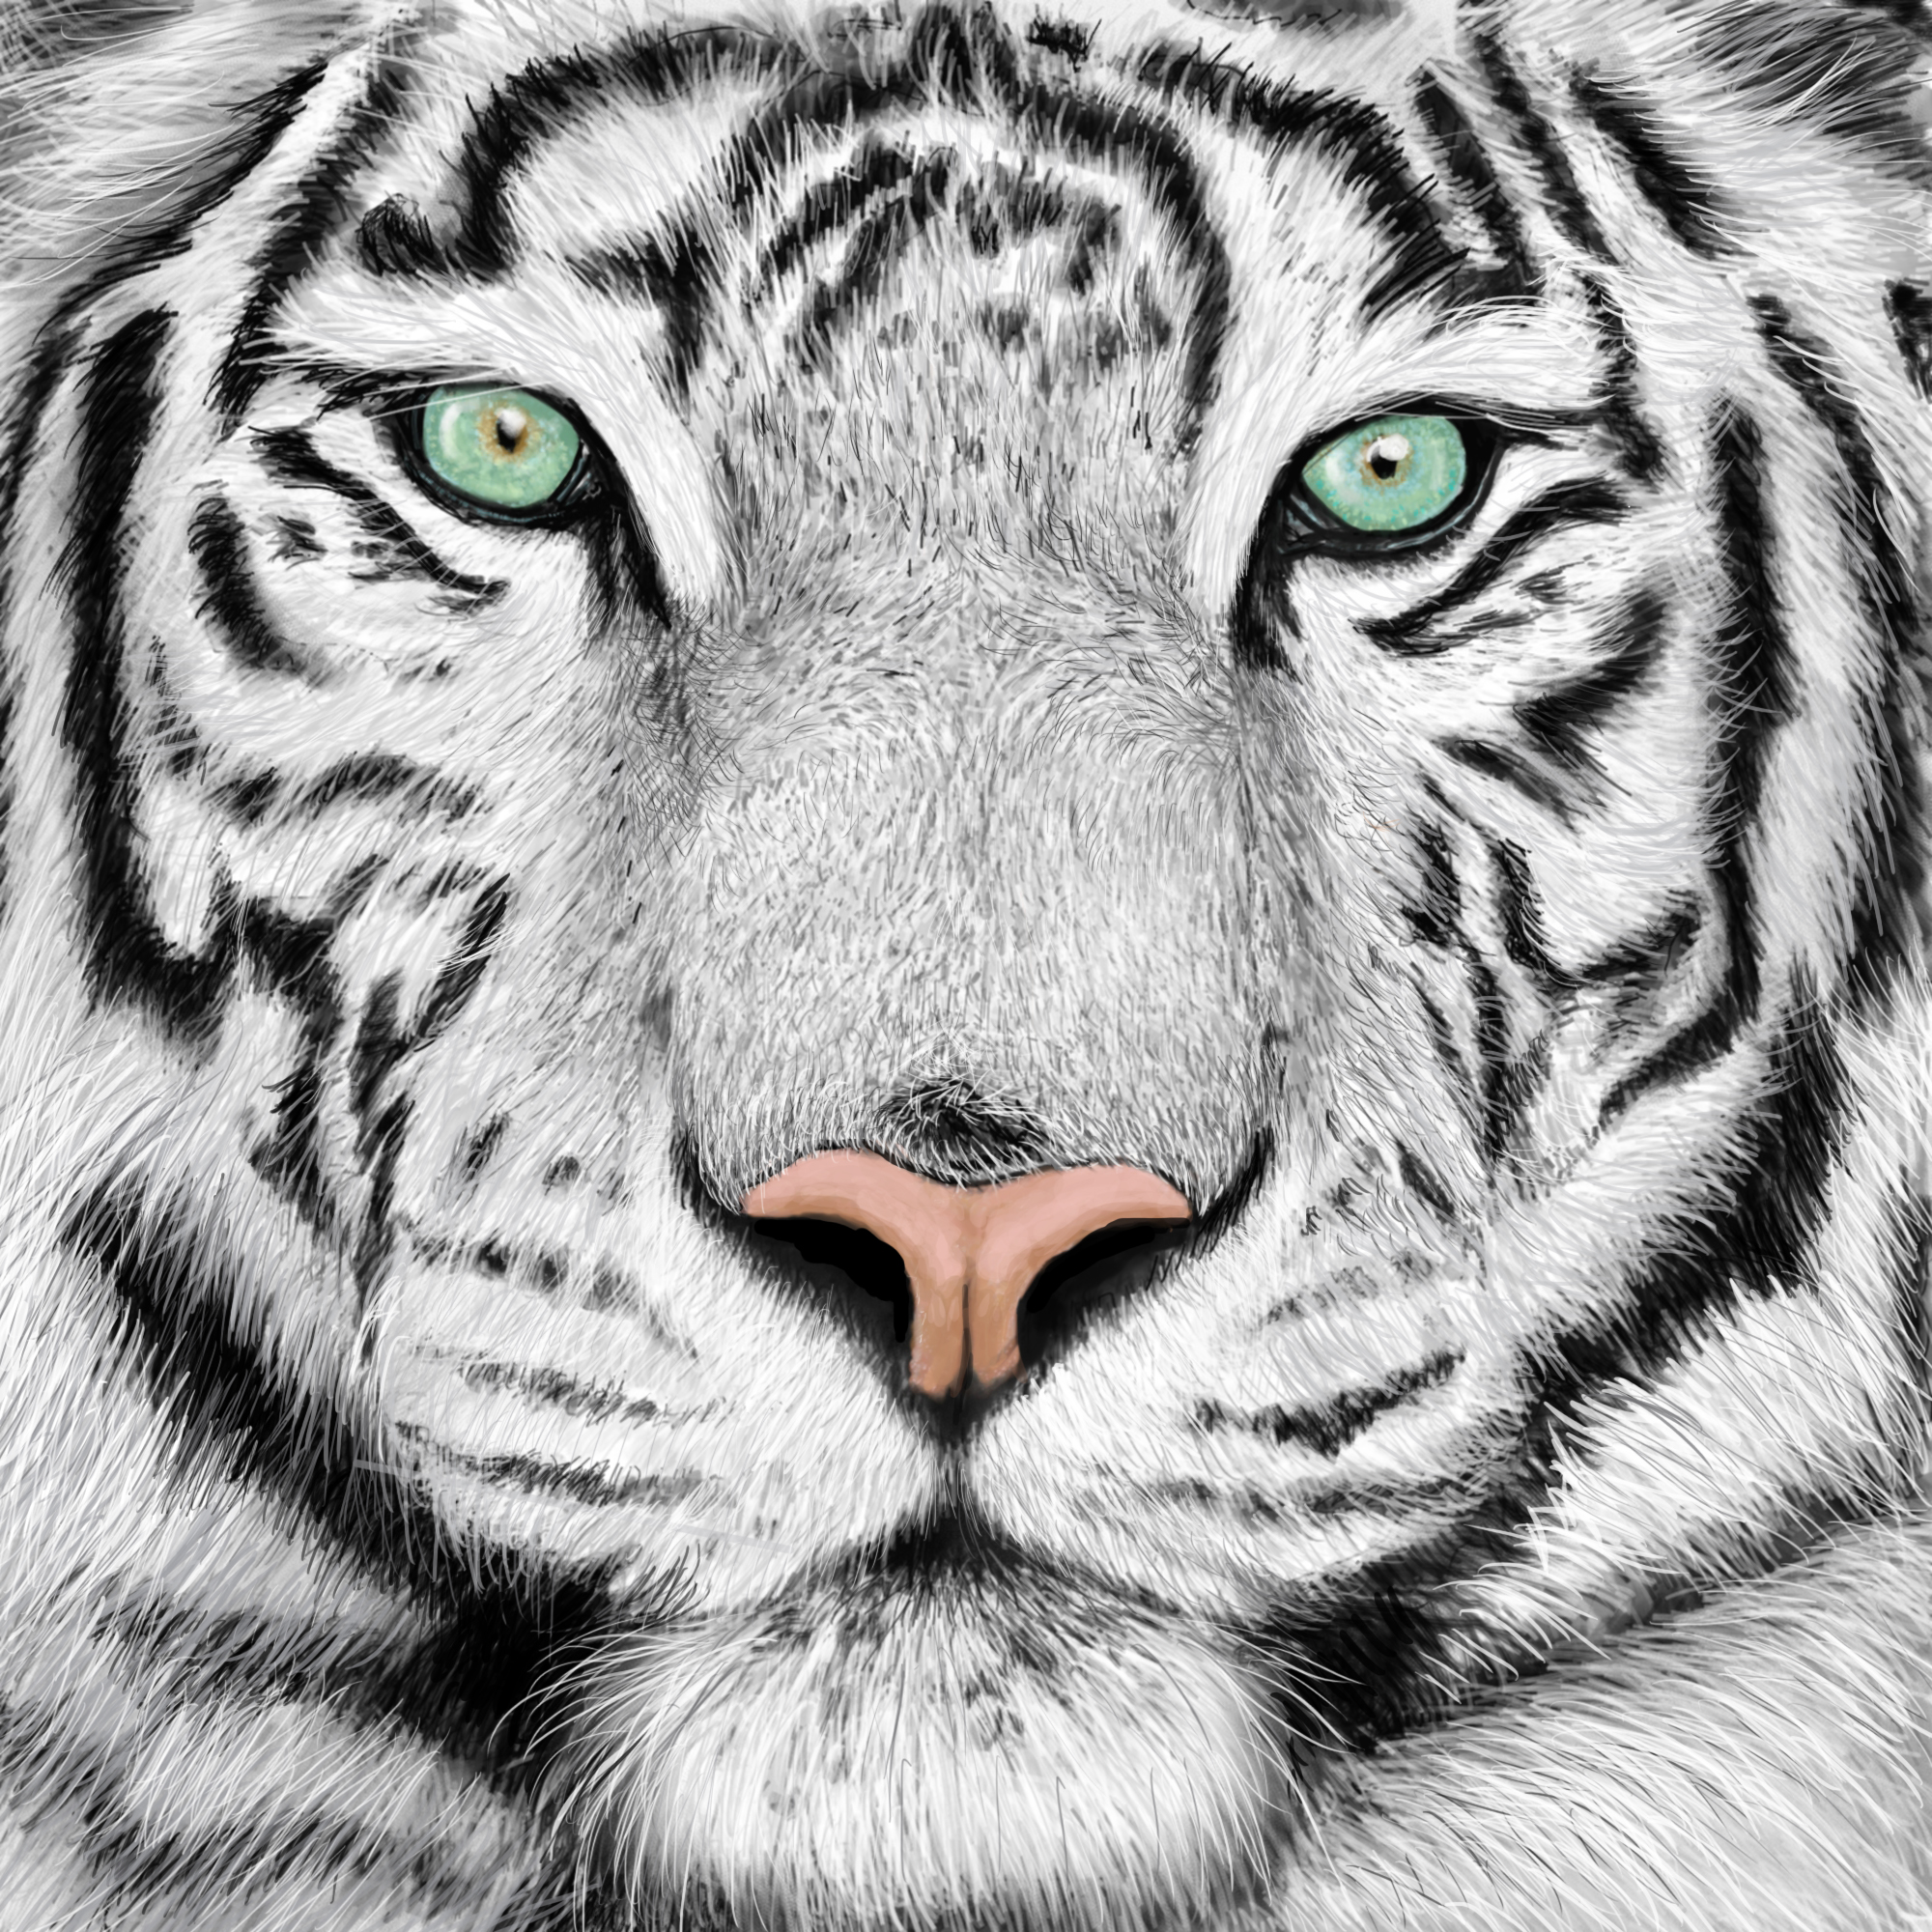 Tiger Face Sketch at PaintingValley.com | Explore ...